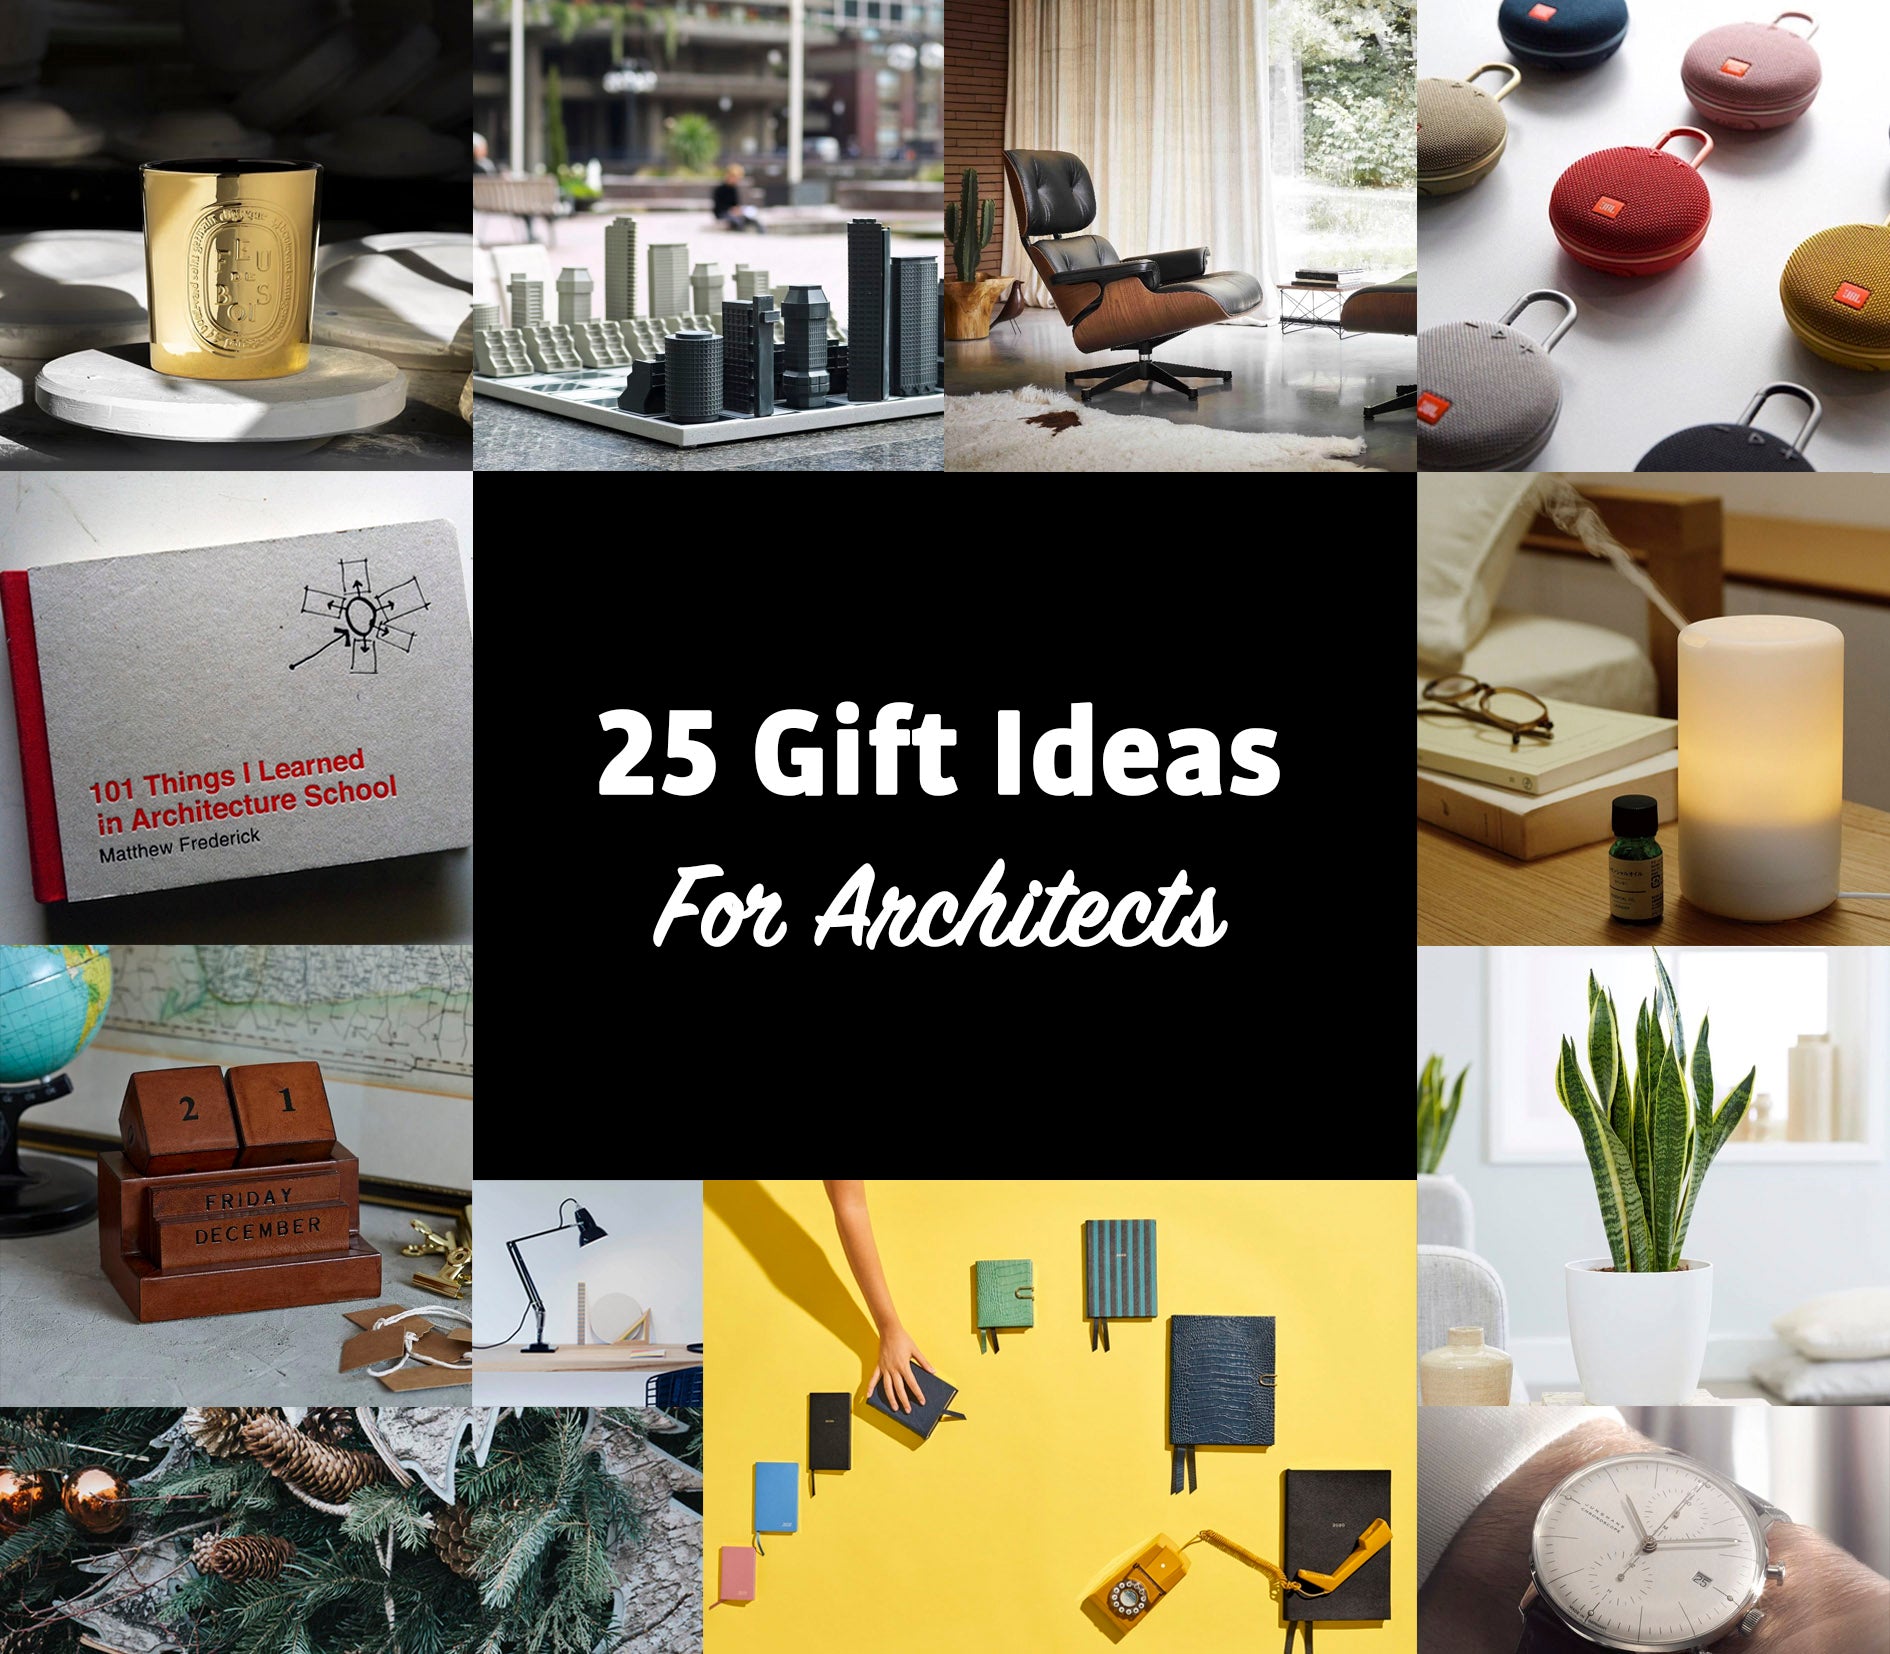 25 Gift Ideas For Architects (2021) | by Architectour Guide | Medium